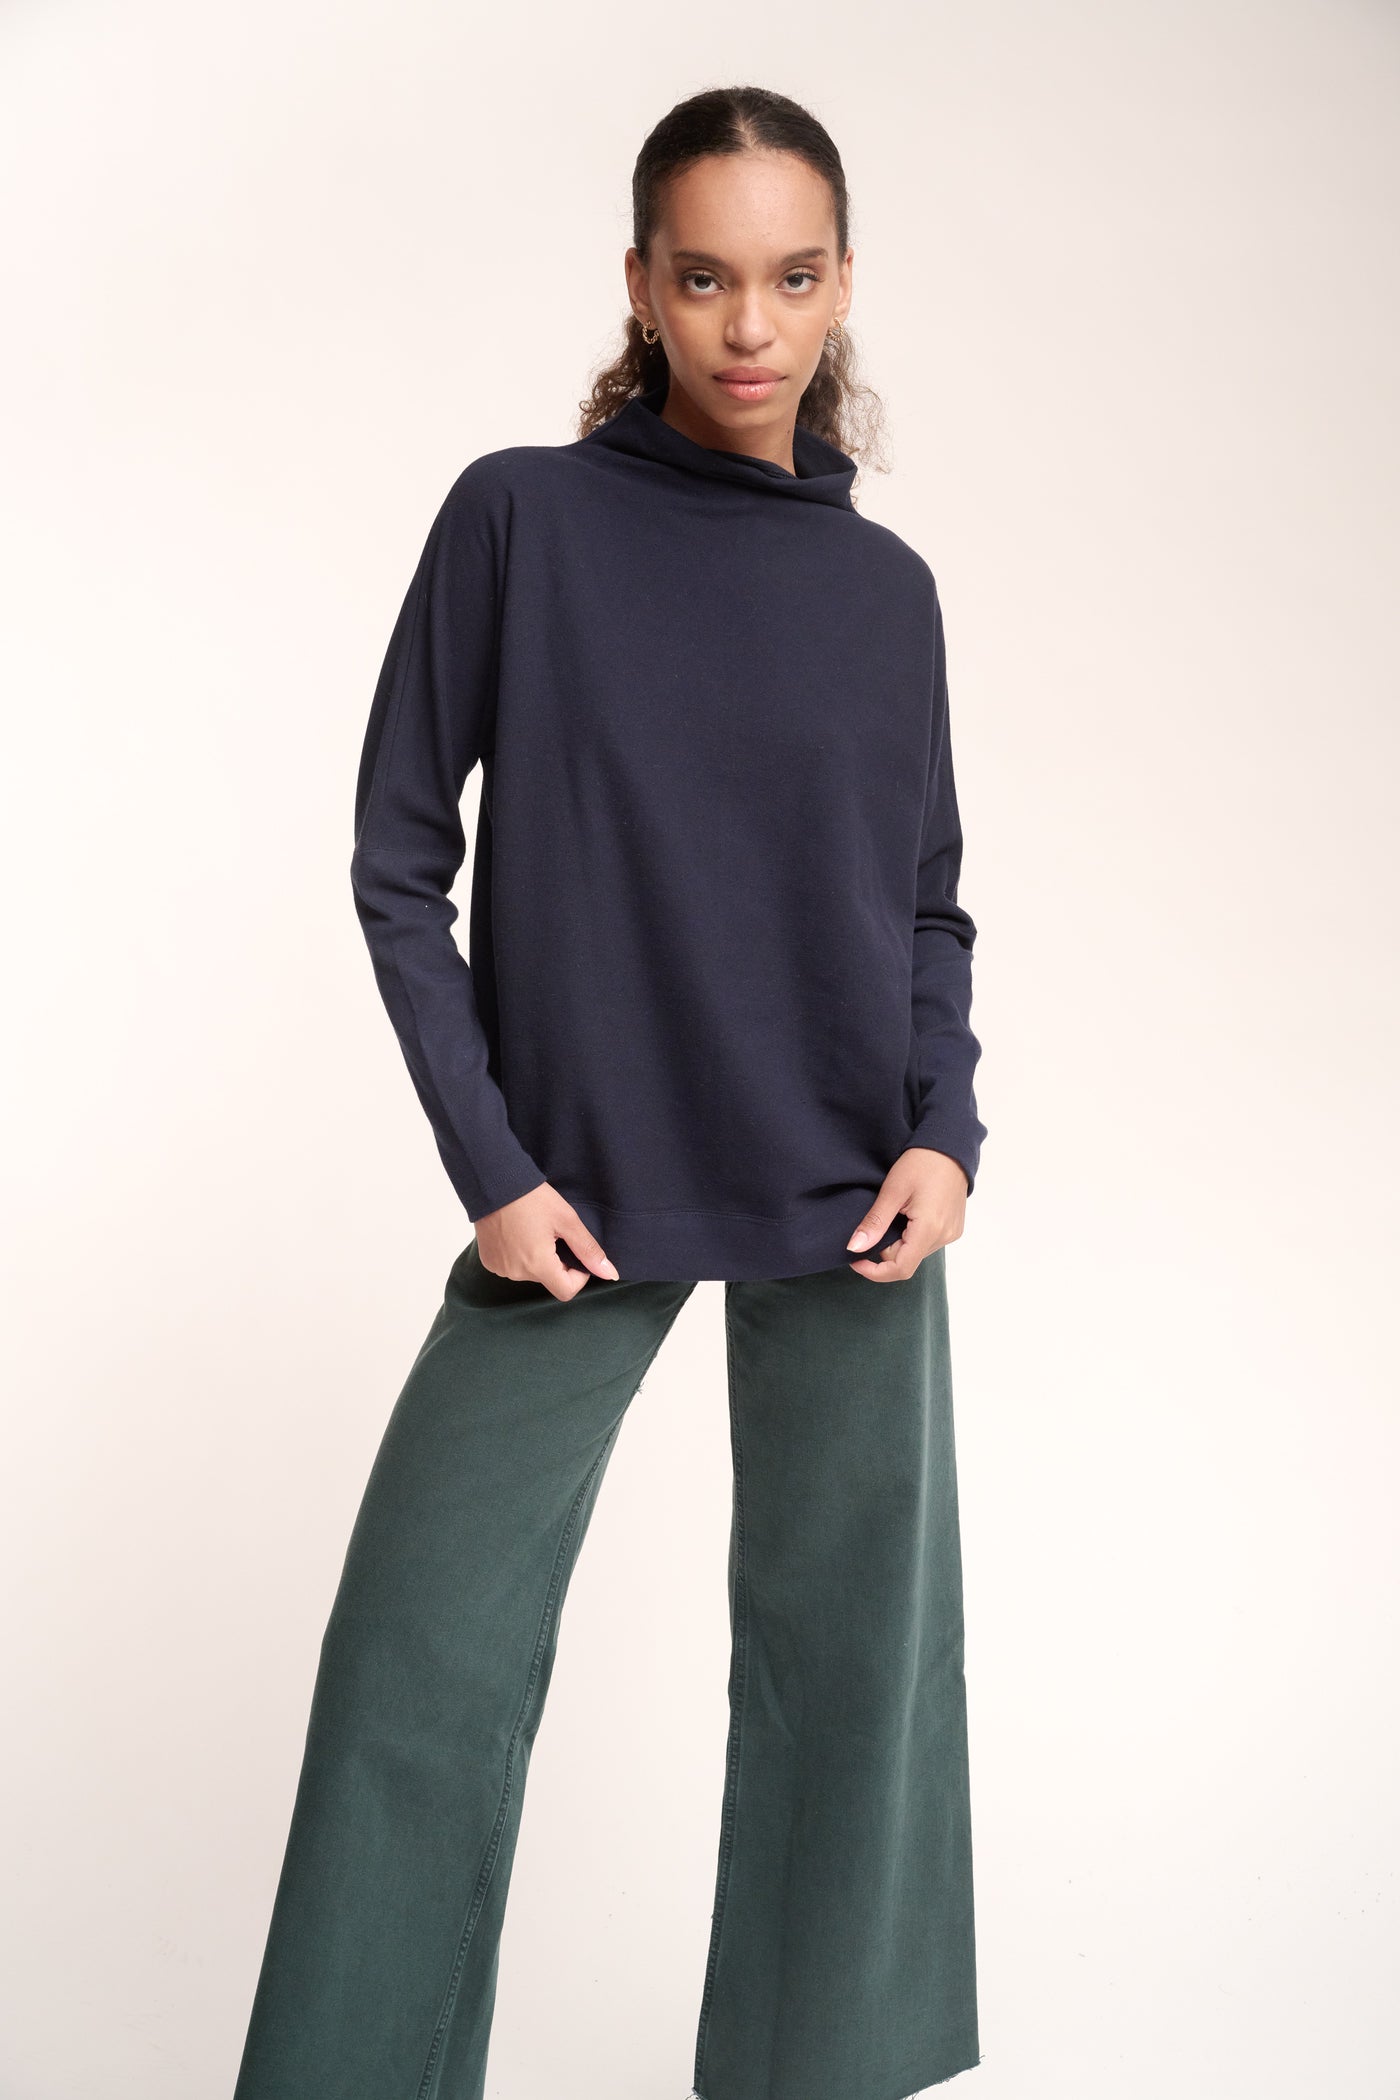 LIZA LONG SLEEVE - midnight, quite shade or red